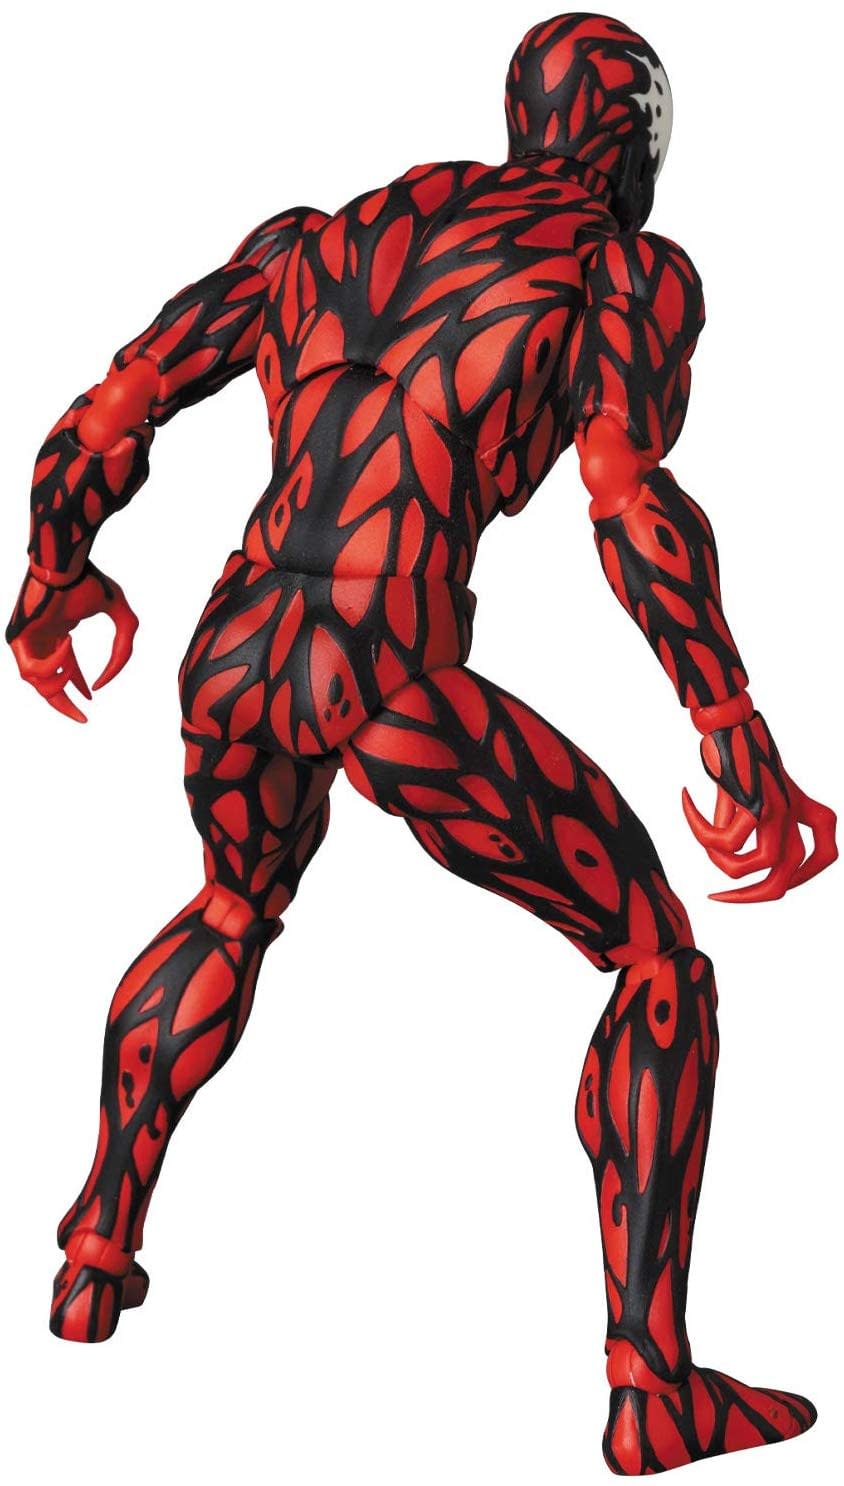 Carnage Is Ready to Create Some Chaos with New MAFEX Figure 